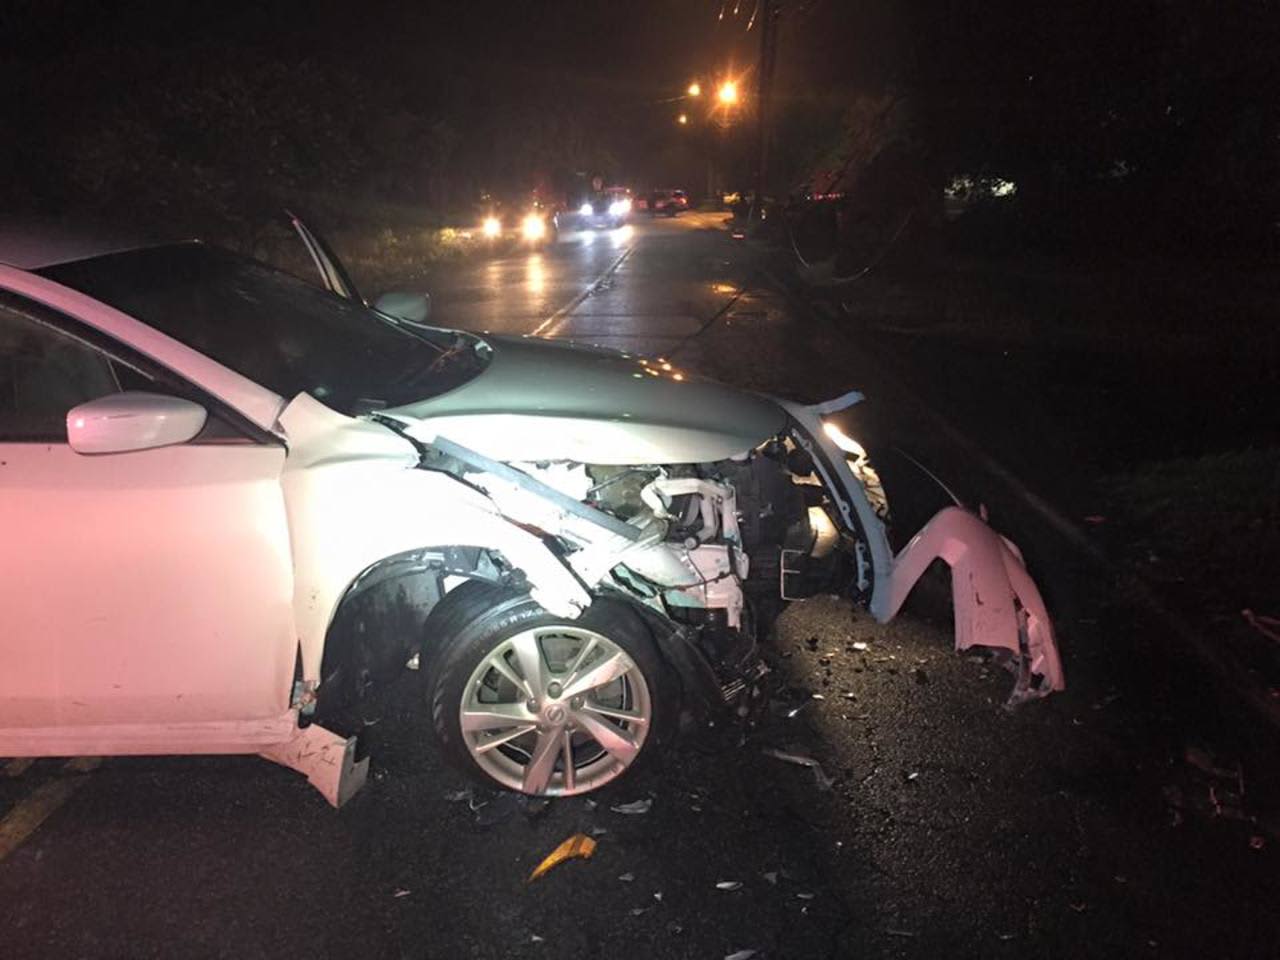 Ramapo police are investigating a car crash on Saddle River Road in Monsey.